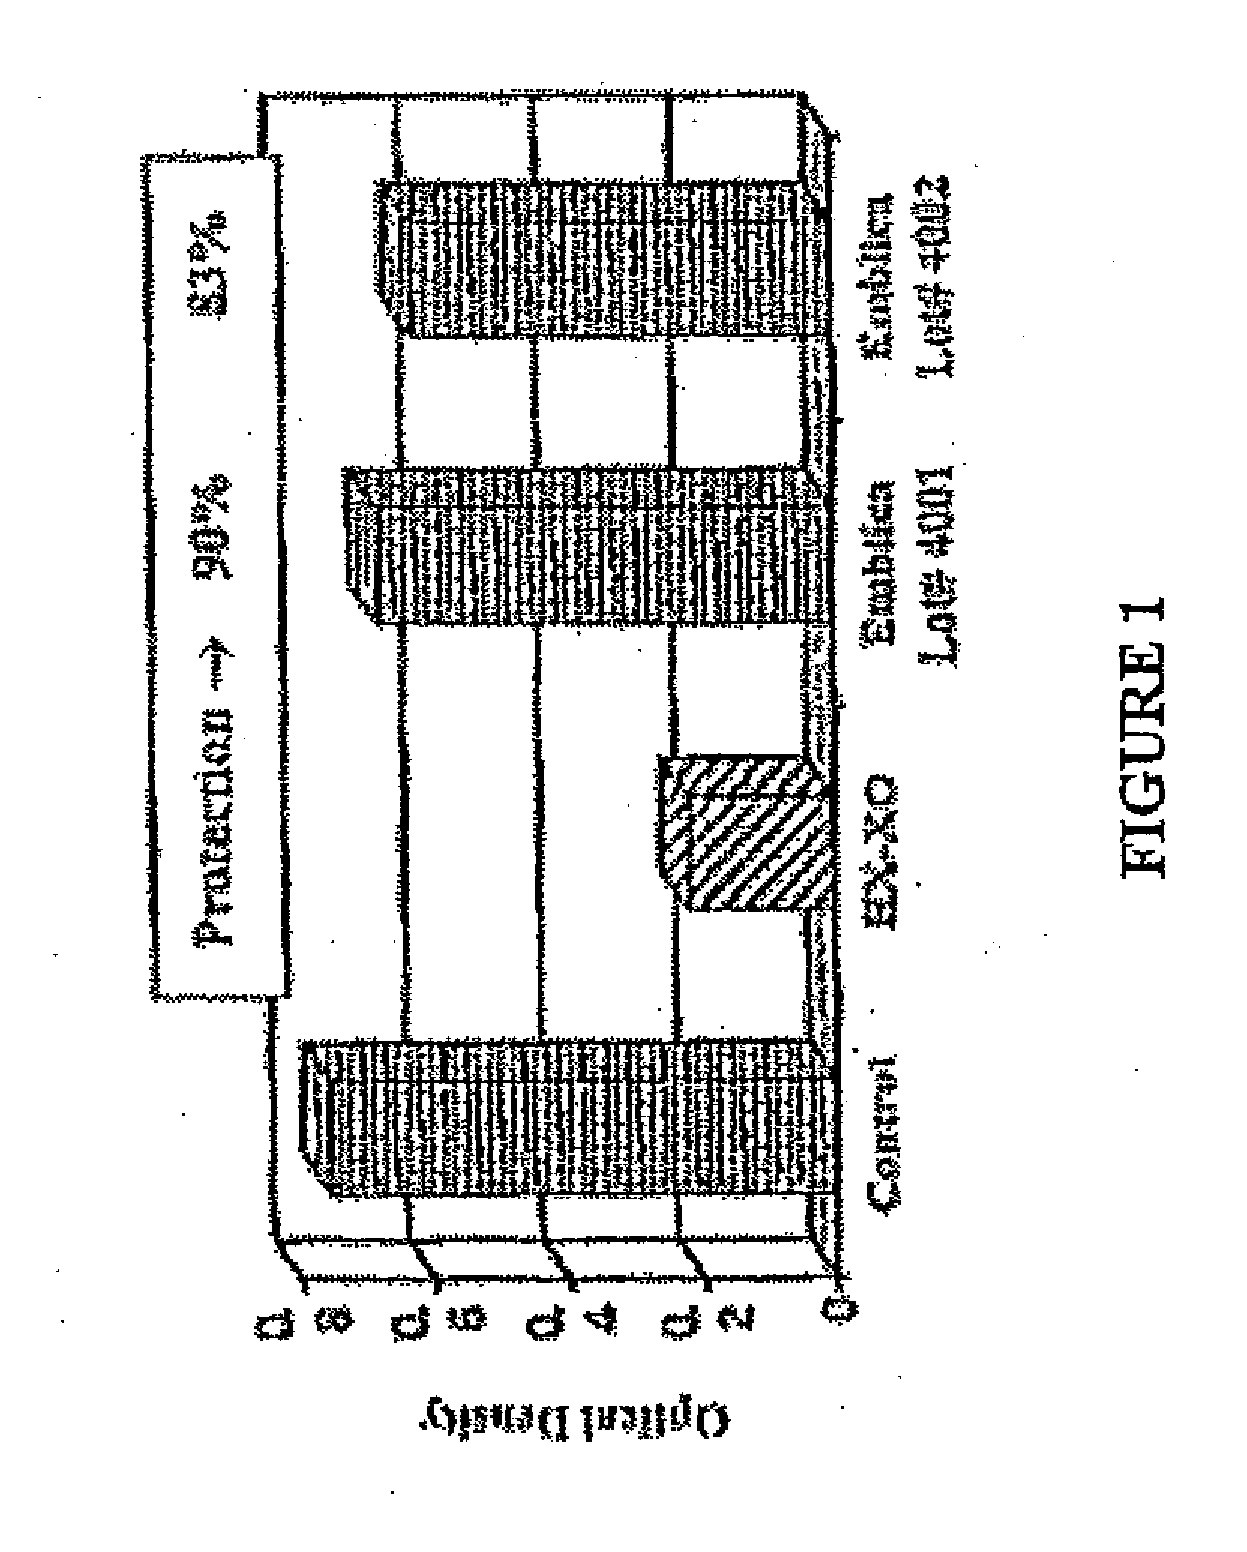 Method for regulating the appearance of skin containing combination of skin care actives